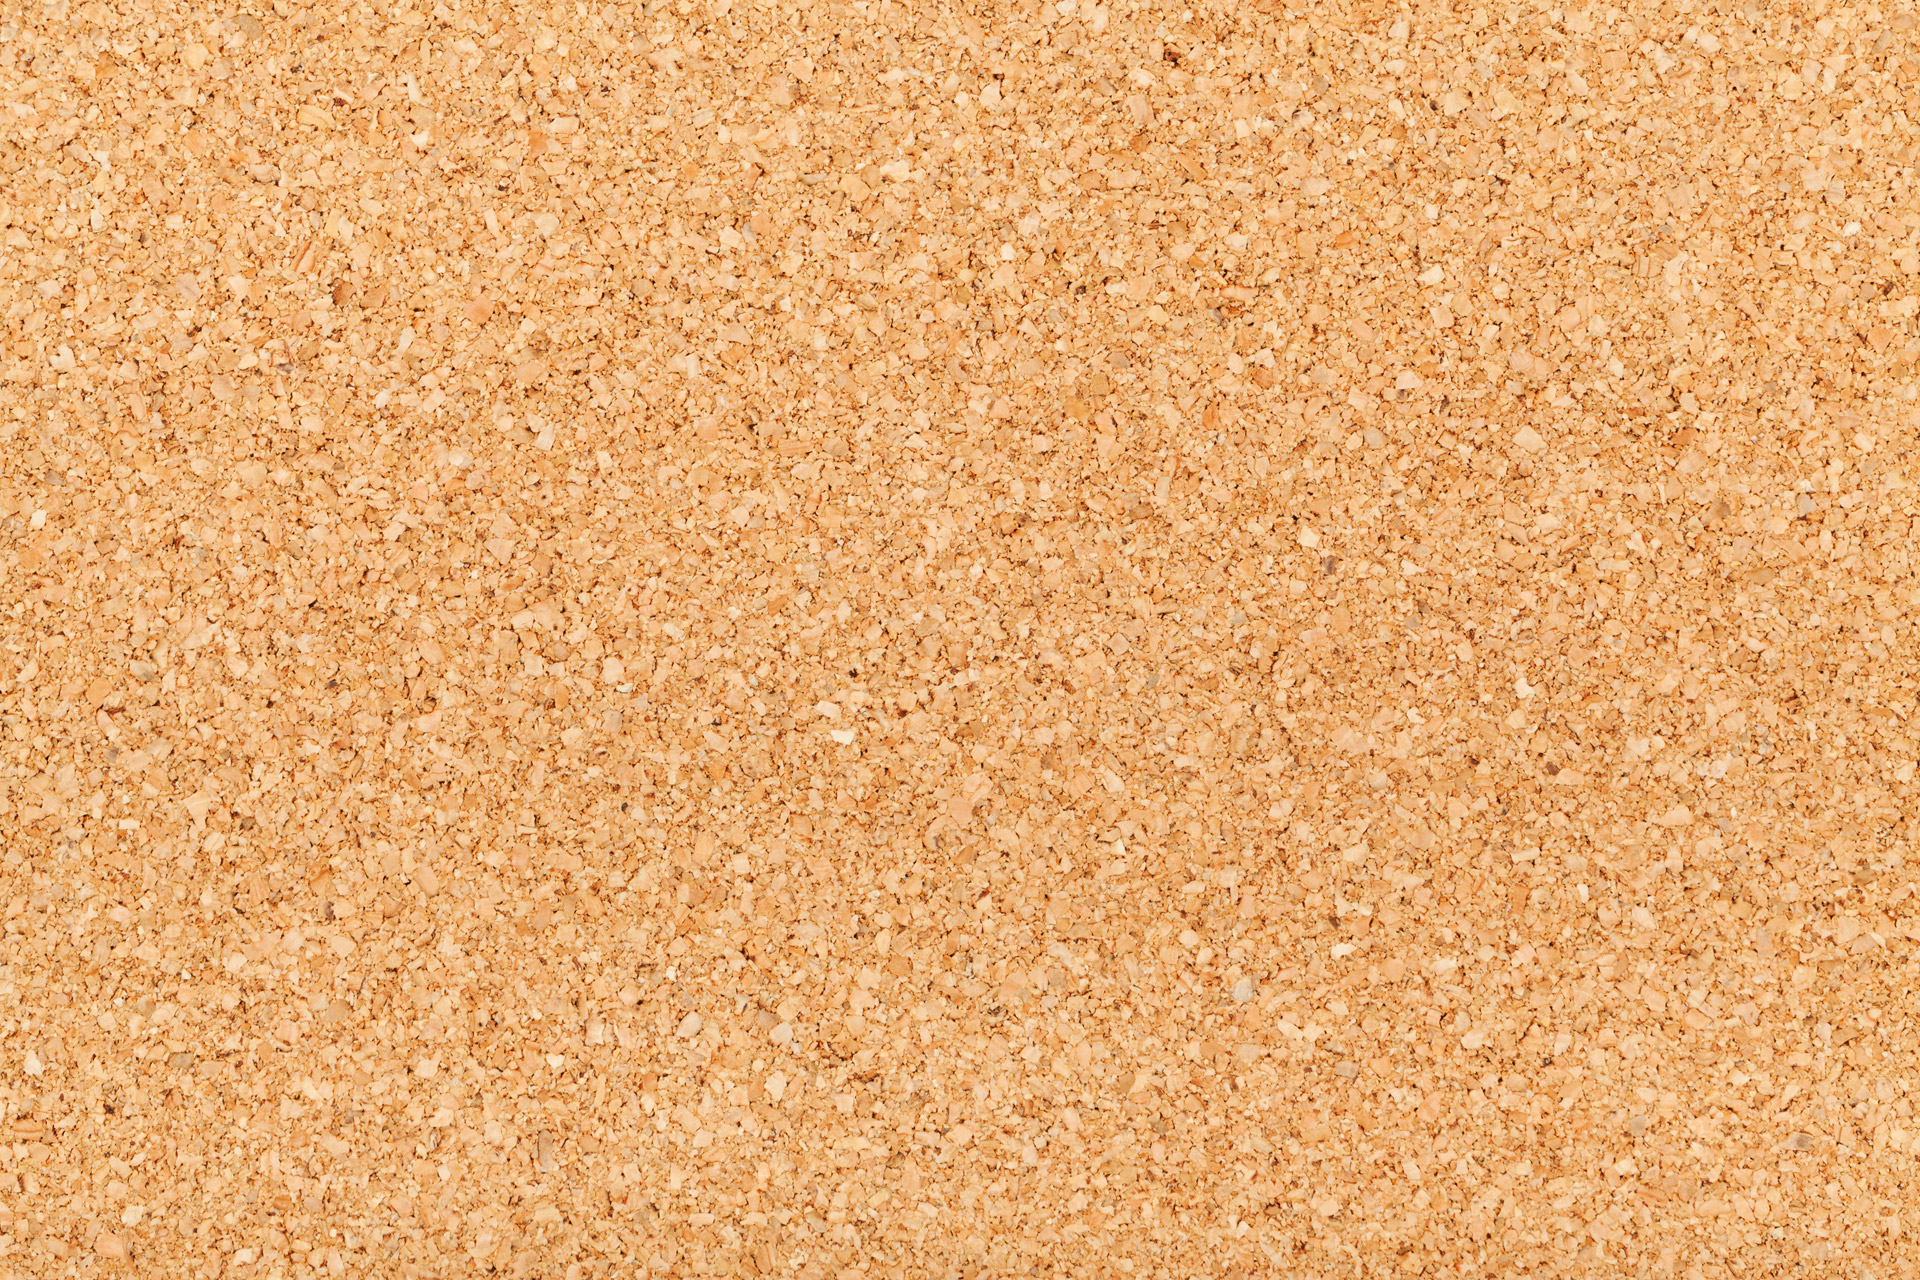 Cork Board Free Stock Photo Public Domain Pictures HD Wallpapers Download Free Images Wallpaper [wallpaper981.blogspot.com]